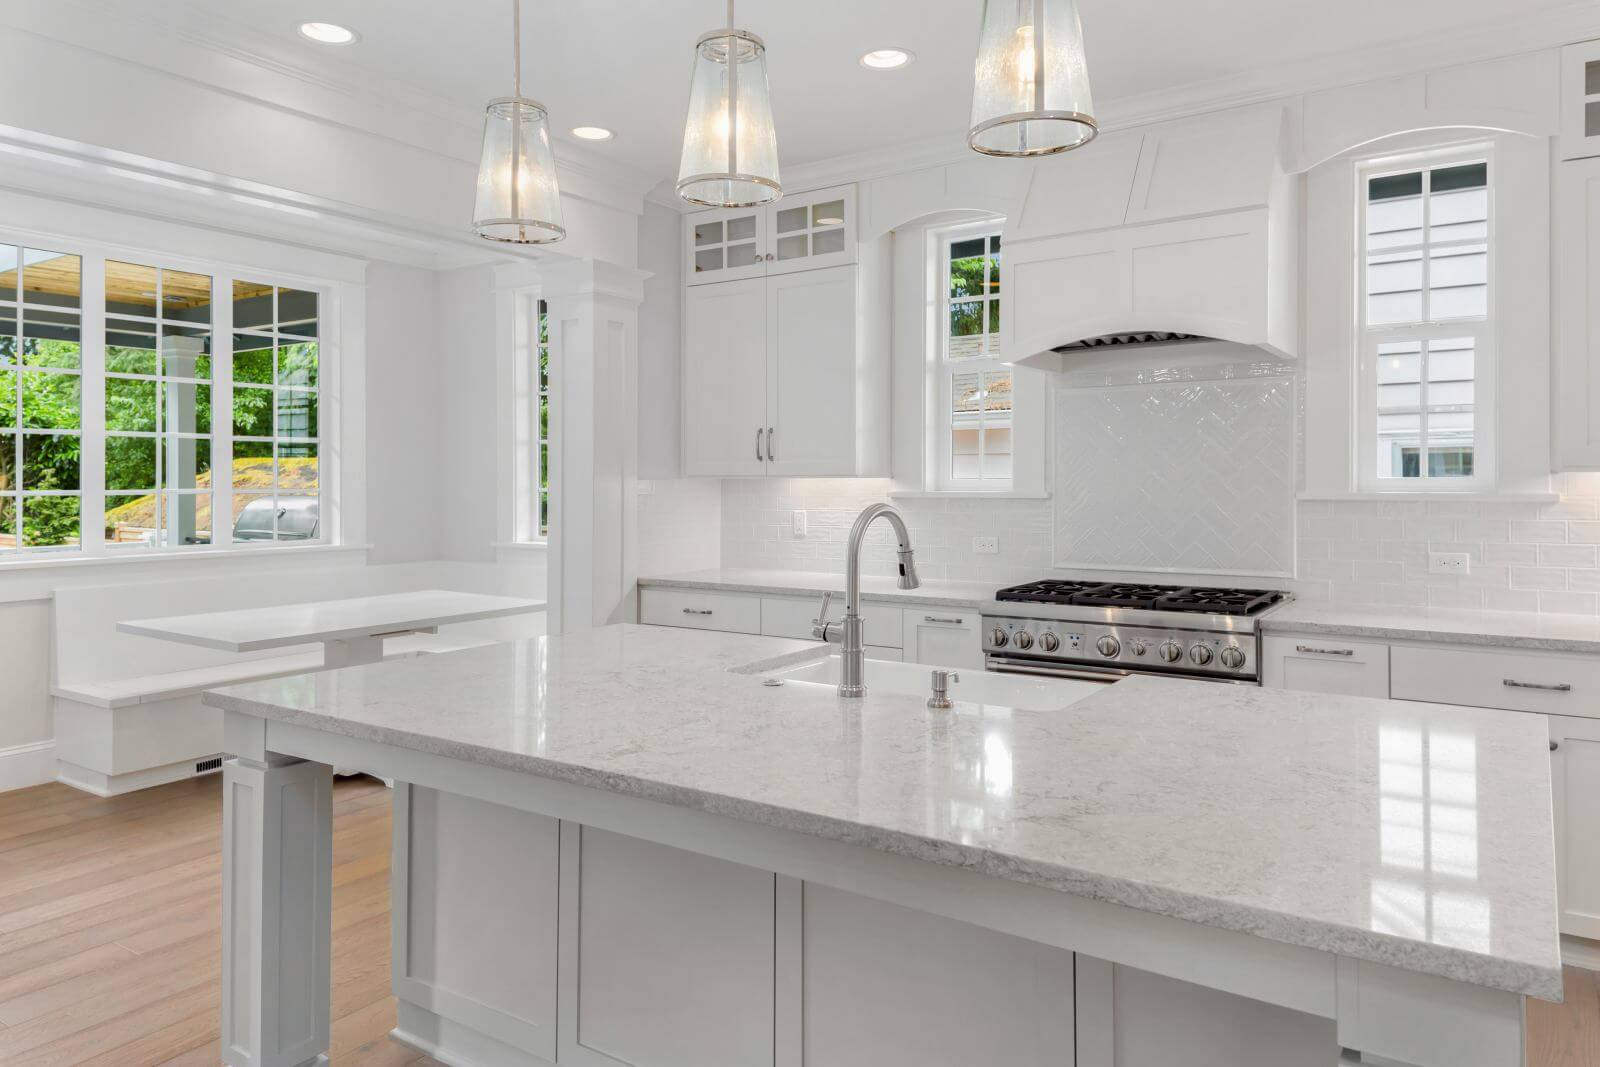 Beautiful White Kitchen in New Luxury Home with Hardwood Floors, Island, and Eating Nook